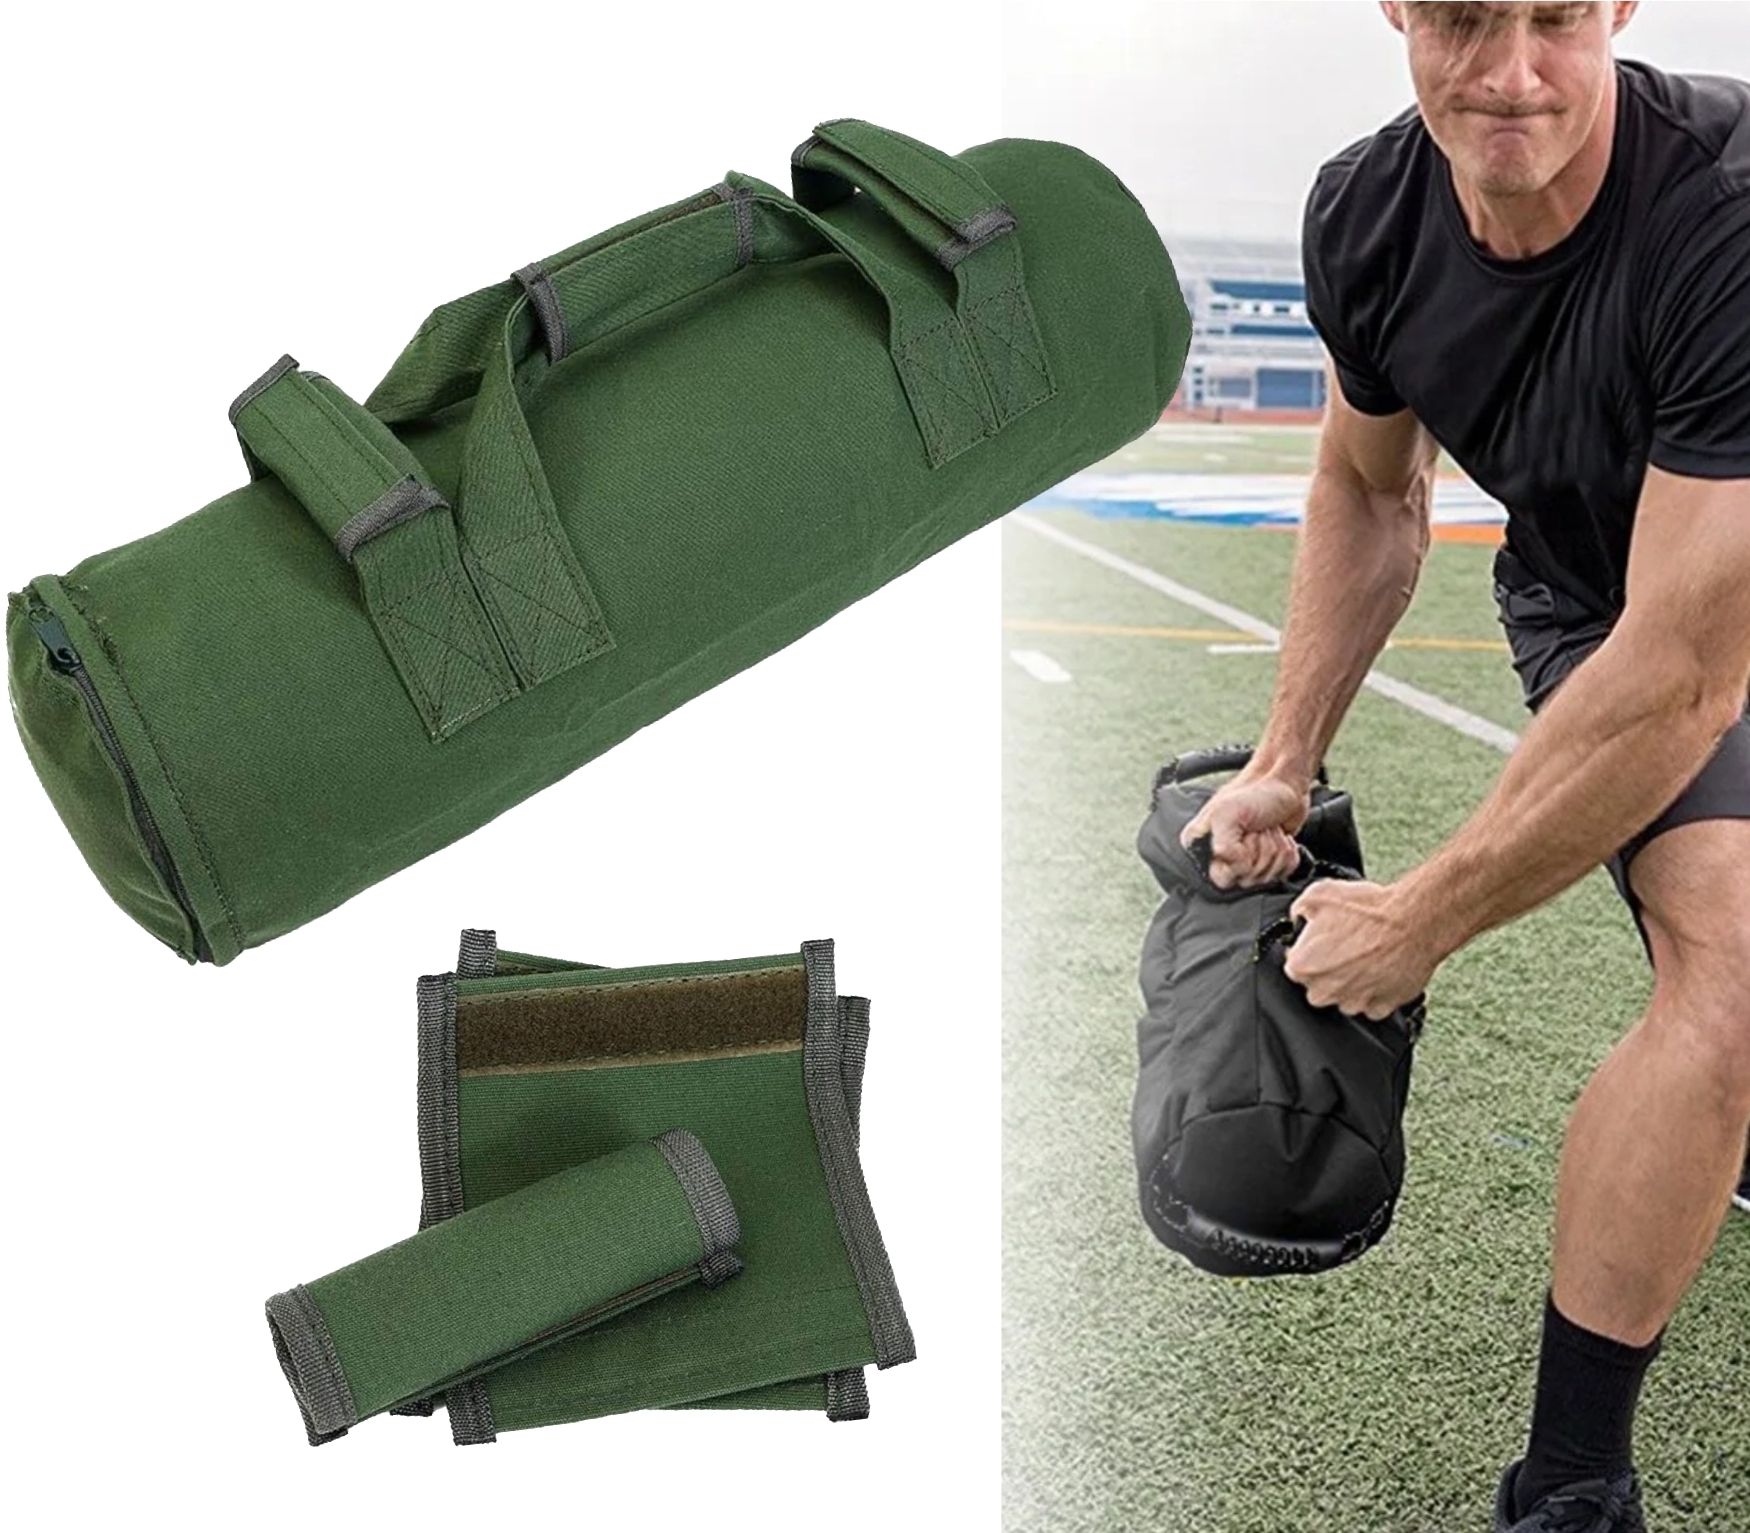 Powerlifting Exercise Adjustable Weight Sandbag 1.3kg upto 27.55kg 60lbs (Army Green) .